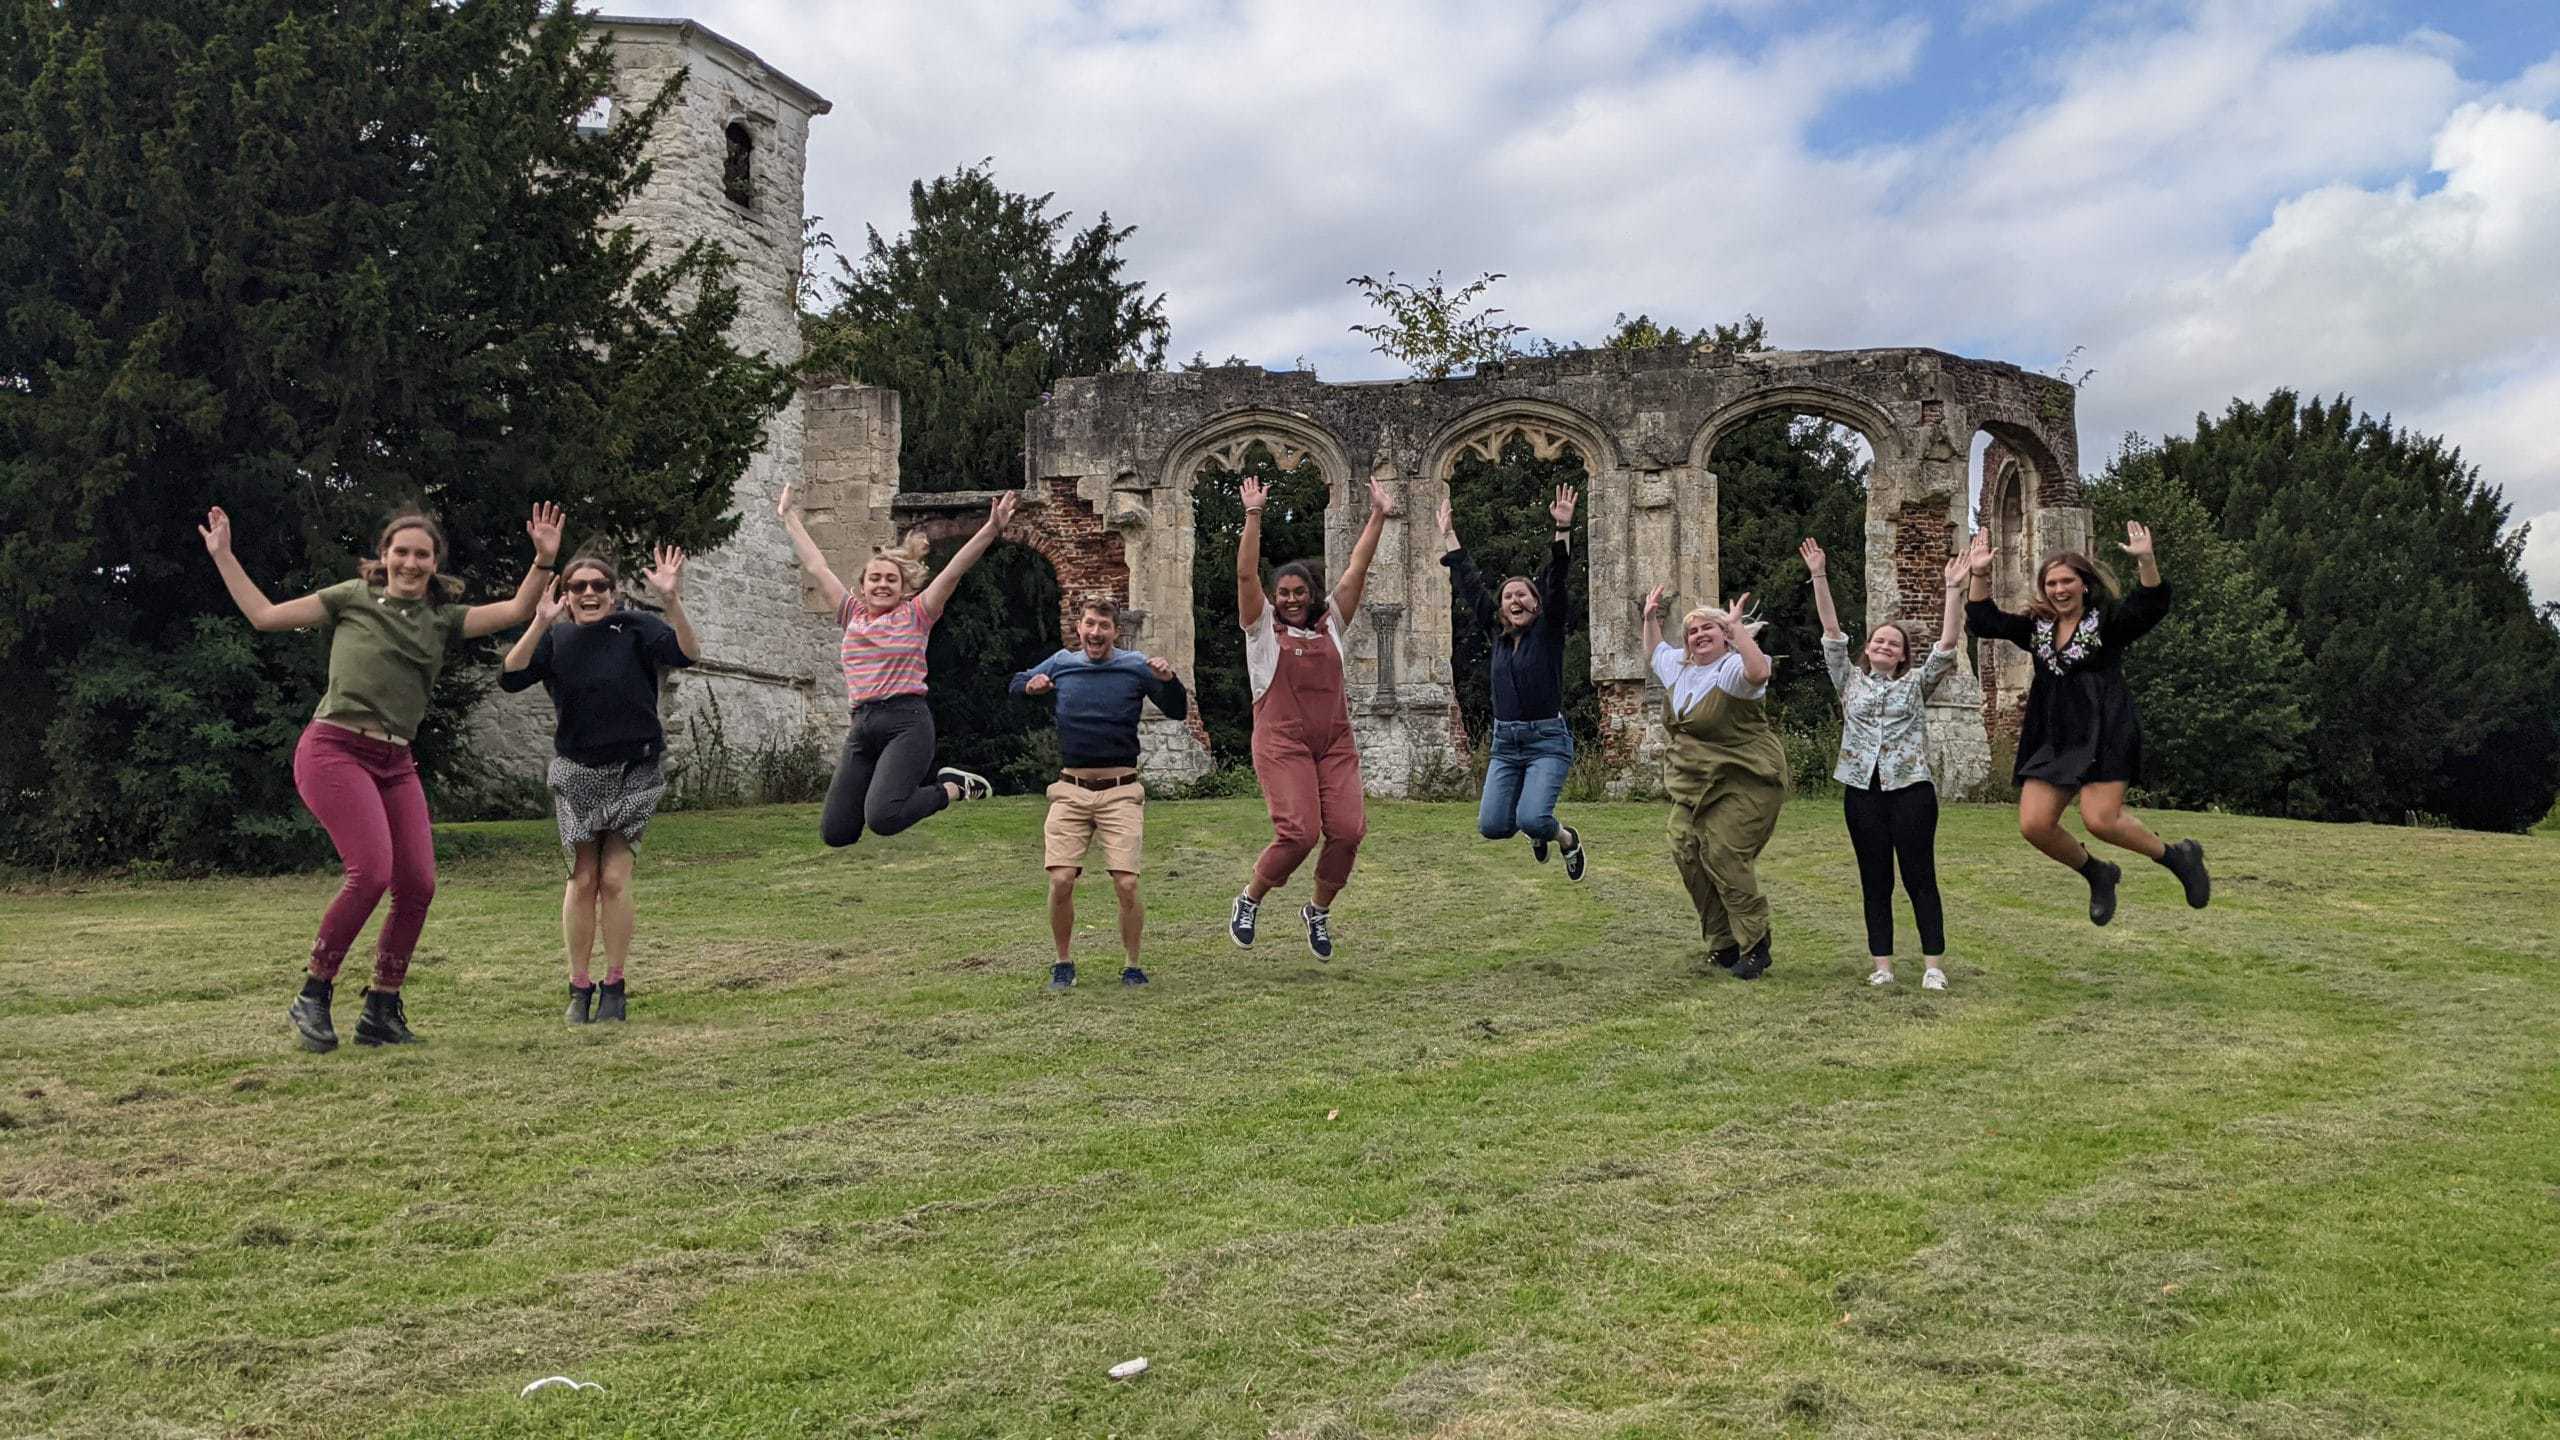 9 members of the Student Hubs staff team jump in front of some ruins in a park.